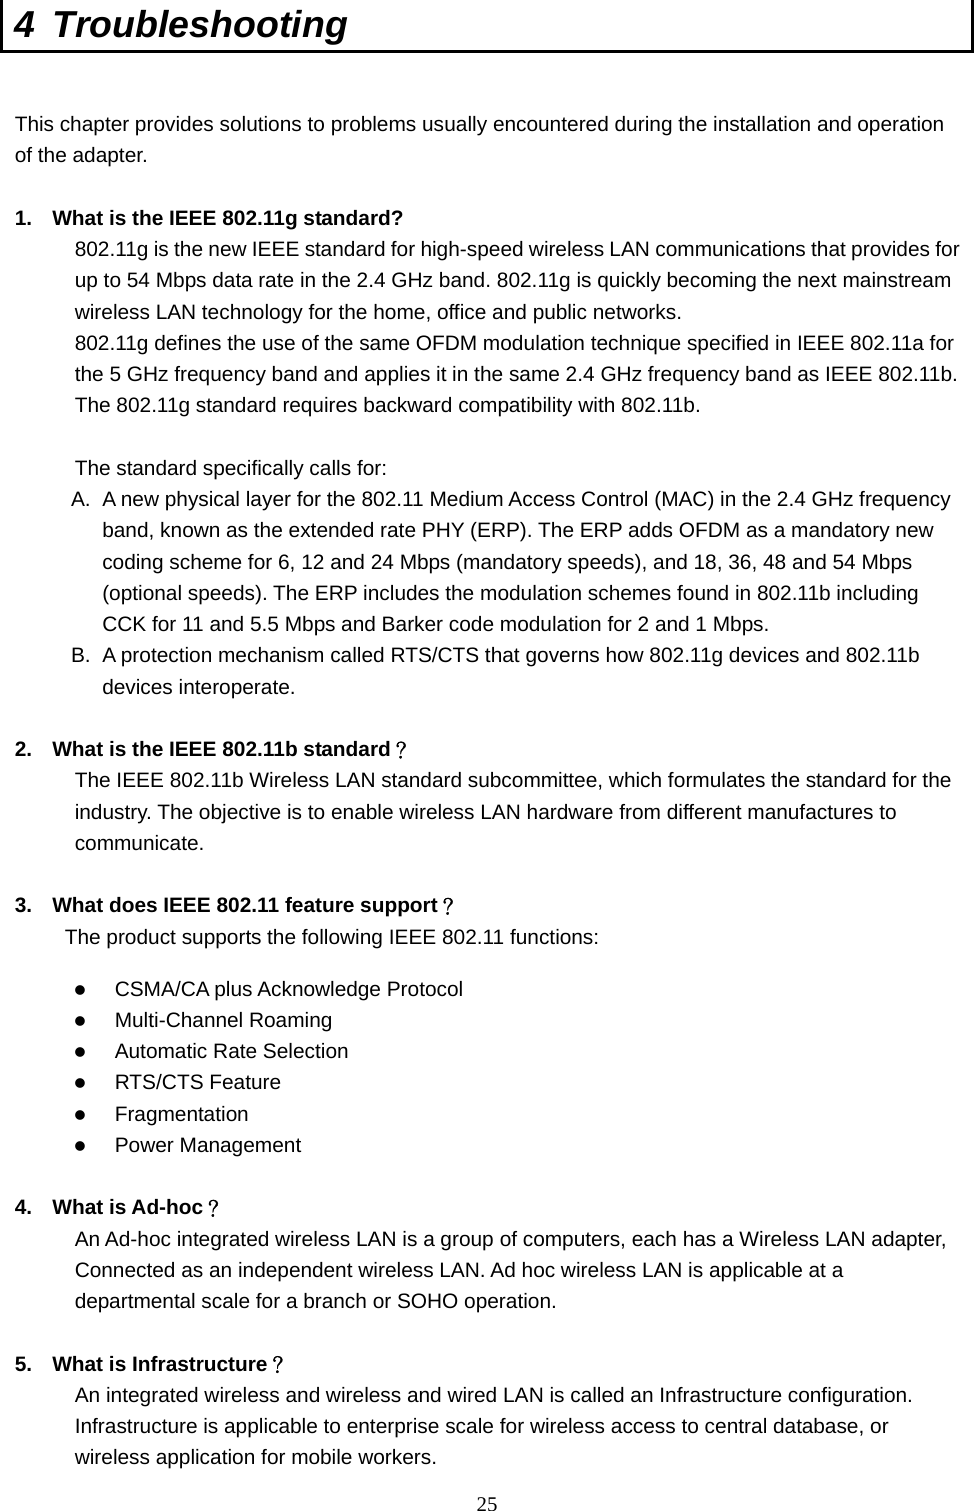  25 4 Troubleshooting  This chapter provides solutions to problems usually encountered during the installation and operation of the adapter.    1.  What is the IEEE 802.11g standard? 802.11g is the new IEEE standard for high-speed wireless LAN communications that provides for up to 54 Mbps data rate in the 2.4 GHz band. 802.11g is quickly becoming the next mainstream wireless LAN technology for the home, office and public networks.   802.11g defines the use of the same OFDM modulation technique specified in IEEE 802.11a for the 5 GHz frequency band and applies it in the same 2.4 GHz frequency band as IEEE 802.11b. The 802.11g standard requires backward compatibility with 802.11b.  The standard specifically calls for:   A.  A new physical layer for the 802.11 Medium Access Control (MAC) in the 2.4 GHz frequency band, known as the extended rate PHY (ERP). The ERP adds OFDM as a mandatory new coding scheme for 6, 12 and 24 Mbps (mandatory speeds), and 18, 36, 48 and 54 Mbps (optional speeds). The ERP includes the modulation schemes found in 802.11b including CCK for 11 and 5.5 Mbps and Barker code modulation for 2 and 1 Mbps. B.  A protection mechanism called RTS/CTS that governs how 802.11g devices and 802.11b devices interoperate.  2.  What is the IEEE 802.11b standard？ The IEEE 802.11b Wireless LAN standard subcommittee, which formulates the standard for the industry. The objective is to enable wireless LAN hardware from different manufactures to communicate.  3.  What does IEEE 802.11 feature support？ The product supports the following IEEE 802.11 functions:   CSMA/CA plus Acknowledge Protocol   Multi-Channel Roaming   Automatic Rate Selection   RTS/CTS Feature   Fragmentation   Power Management  4. What is Ad-hoc？ An Ad-hoc integrated wireless LAN is a group of computers, each has a Wireless LAN adapter, Connected as an independent wireless LAN. Ad hoc wireless LAN is applicable at a departmental scale for a branch or SOHO operation.  5.  What is Infrastructure？ An integrated wireless and wireless and wired LAN is called an Infrastructure configuration. Infrastructure is applicable to enterprise scale for wireless access to central database, or wireless application for mobile workers. 